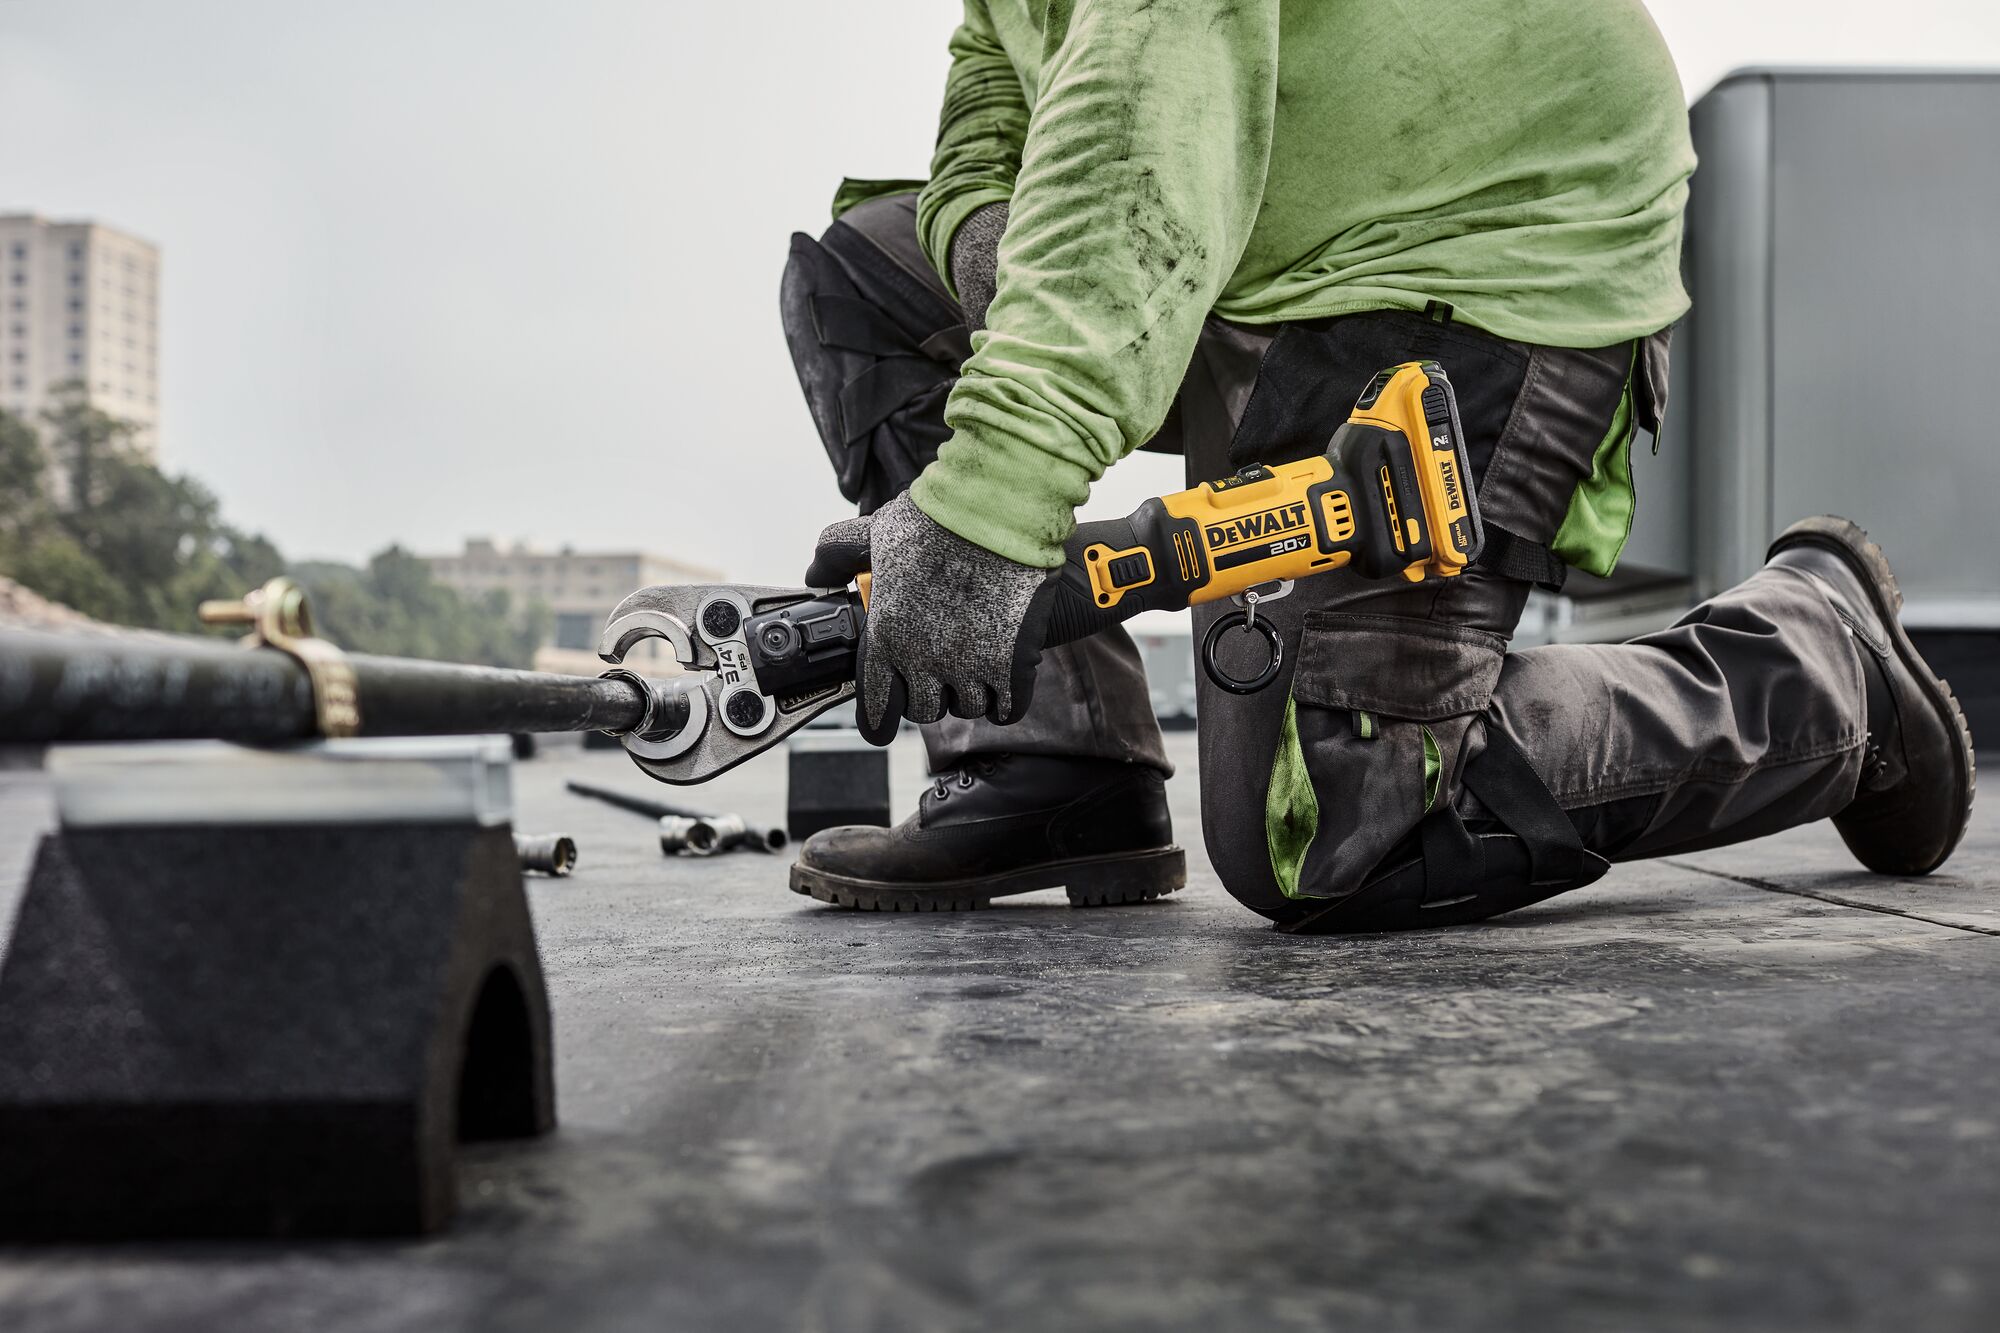 DEWALT Compact Press Tool getting ready to press black iron pipe on a rooftop.